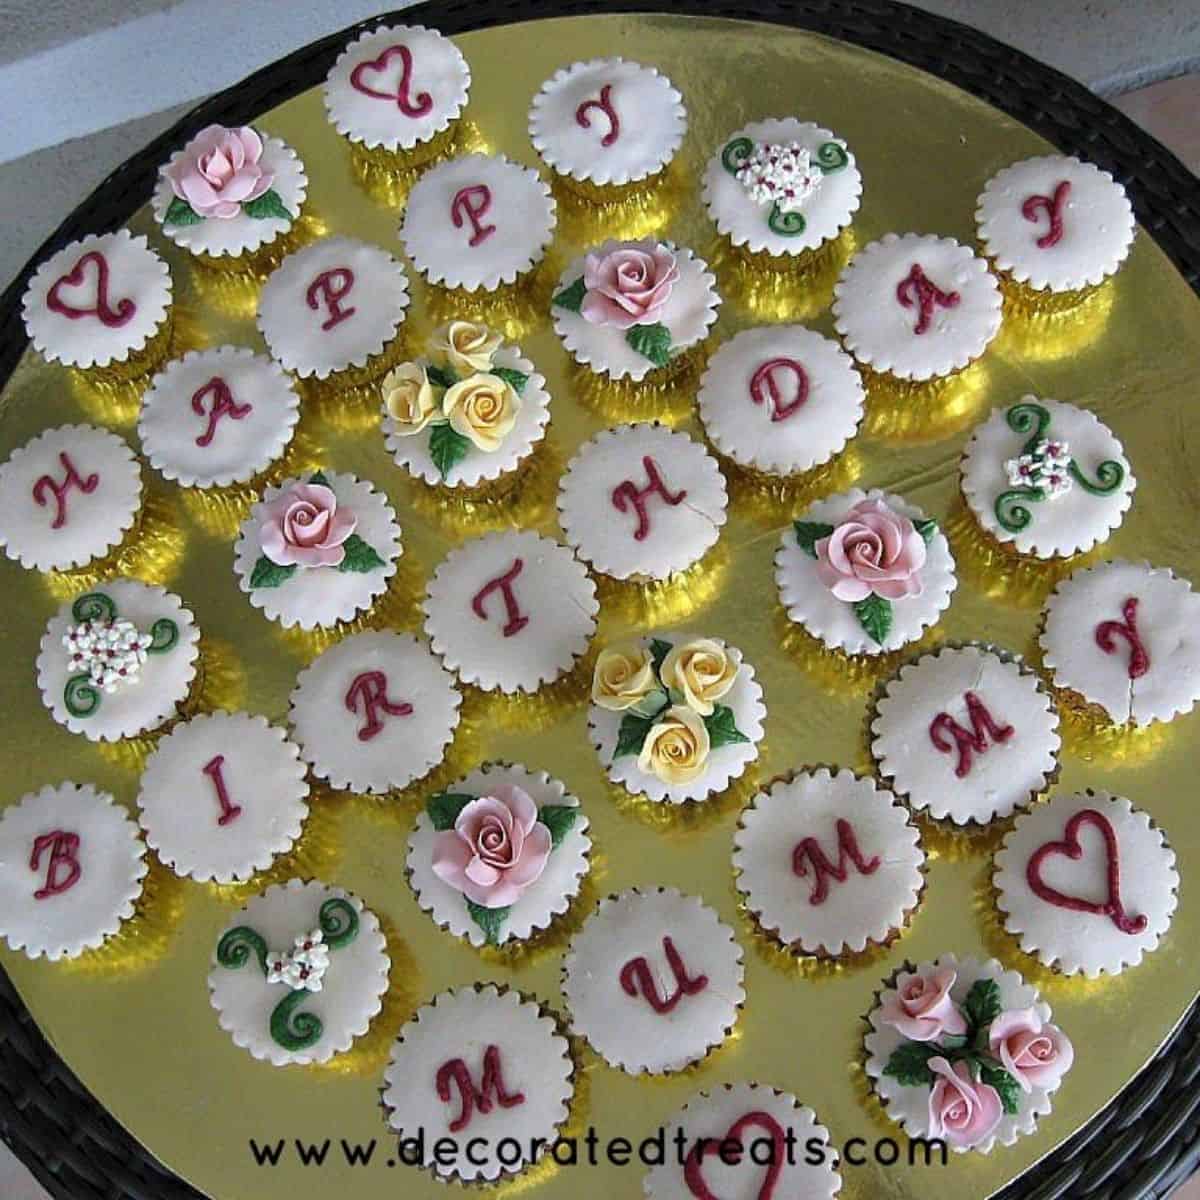 A set of happy birthday cupcakes with a combination of letters and floral design for mom